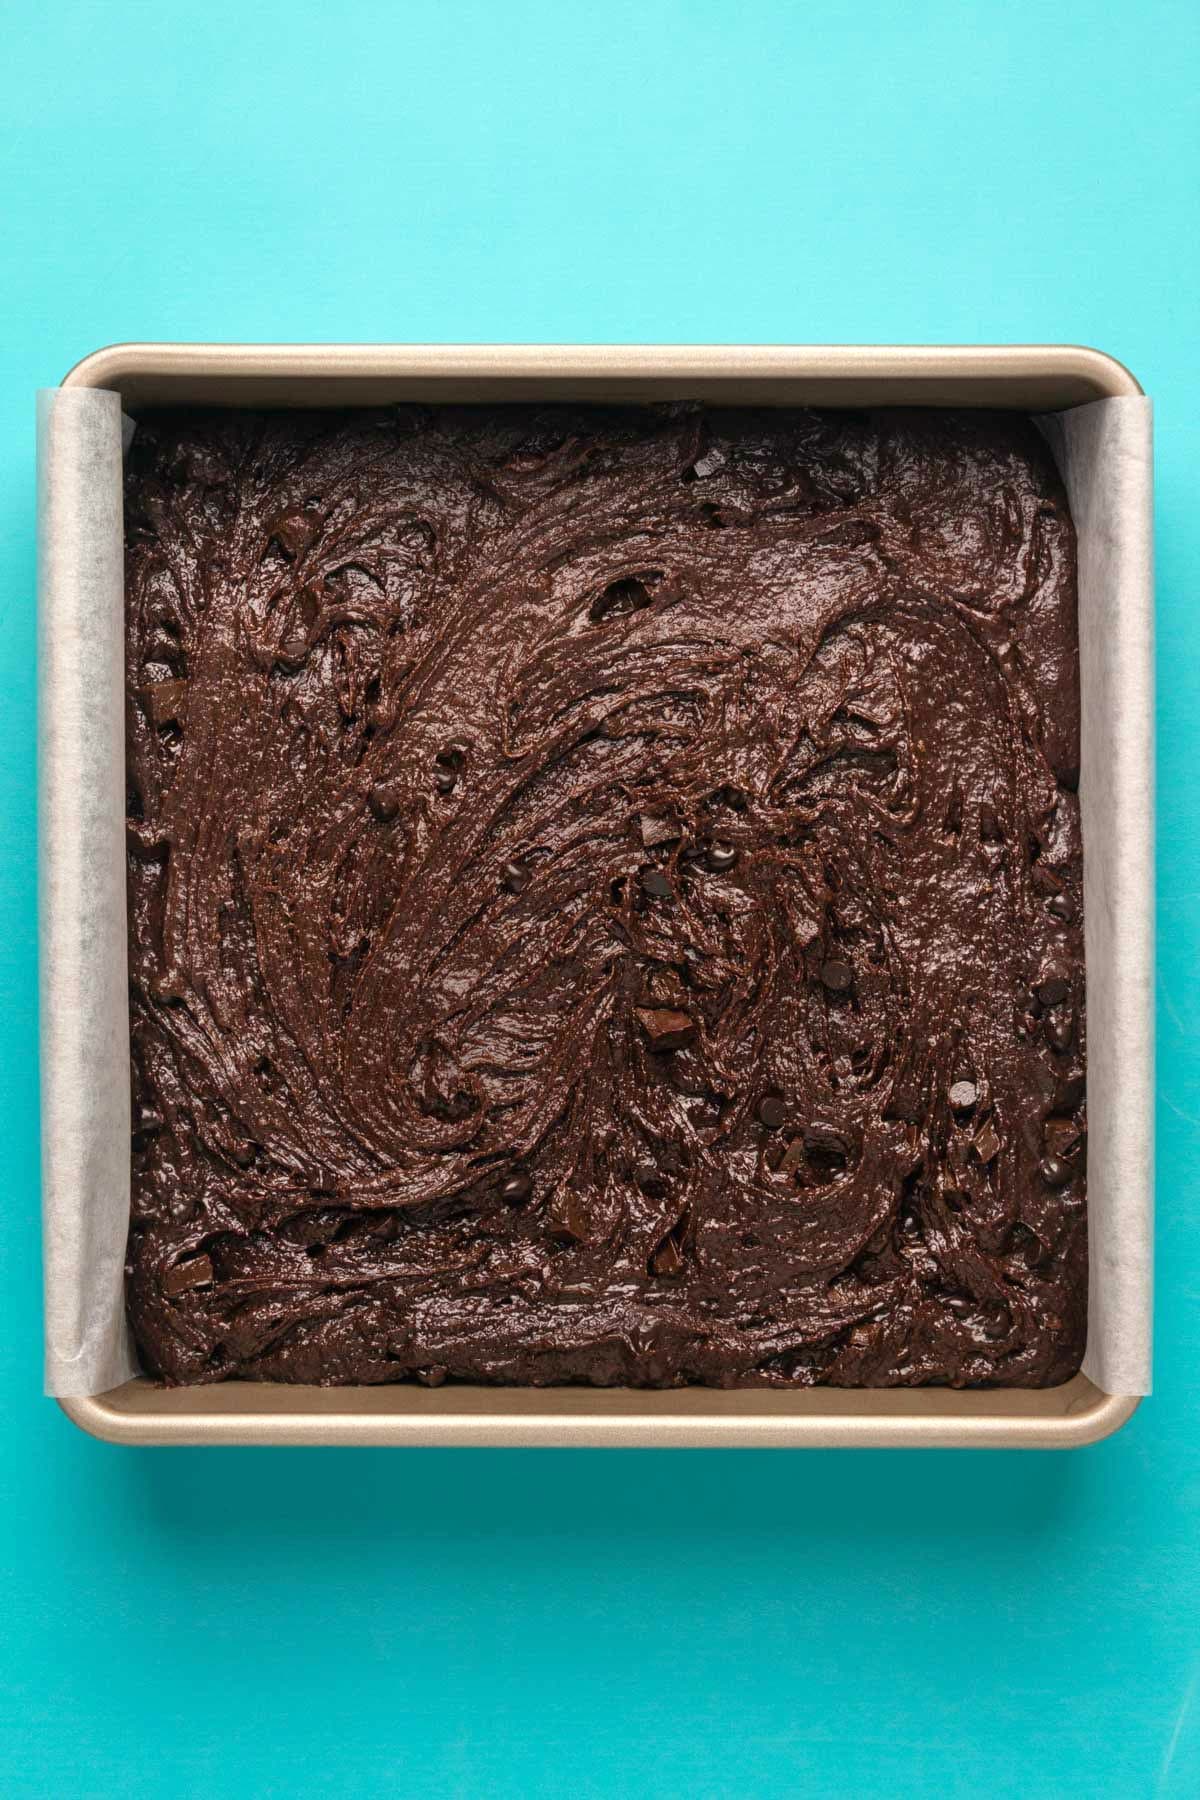 Brownie batter in a 9x9 square baking dish.